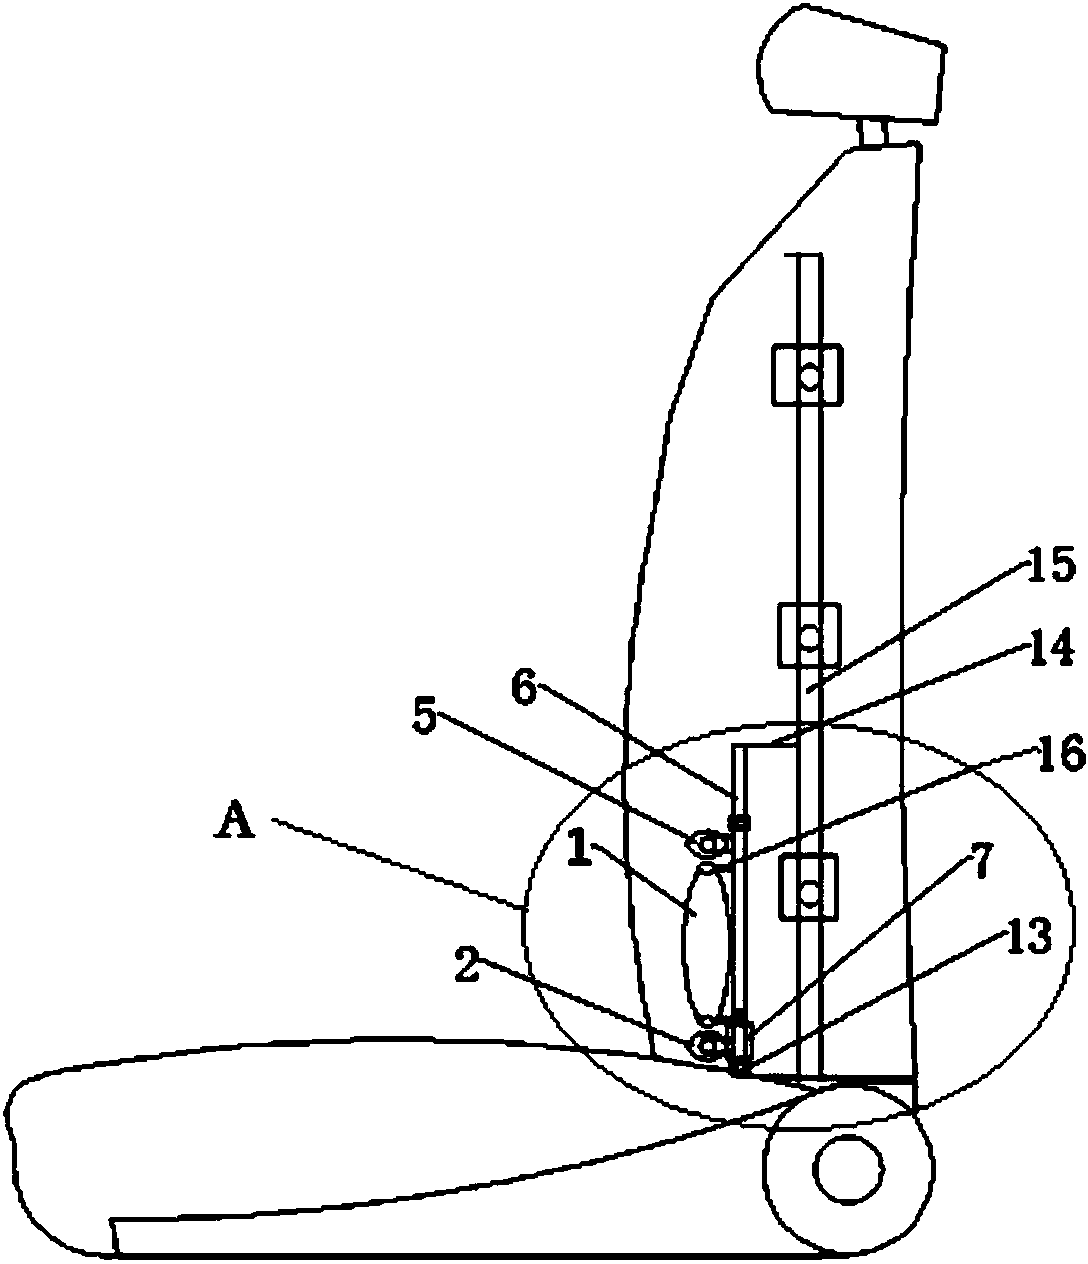 Driving fatigue-relief waist supporting device for automobile seat